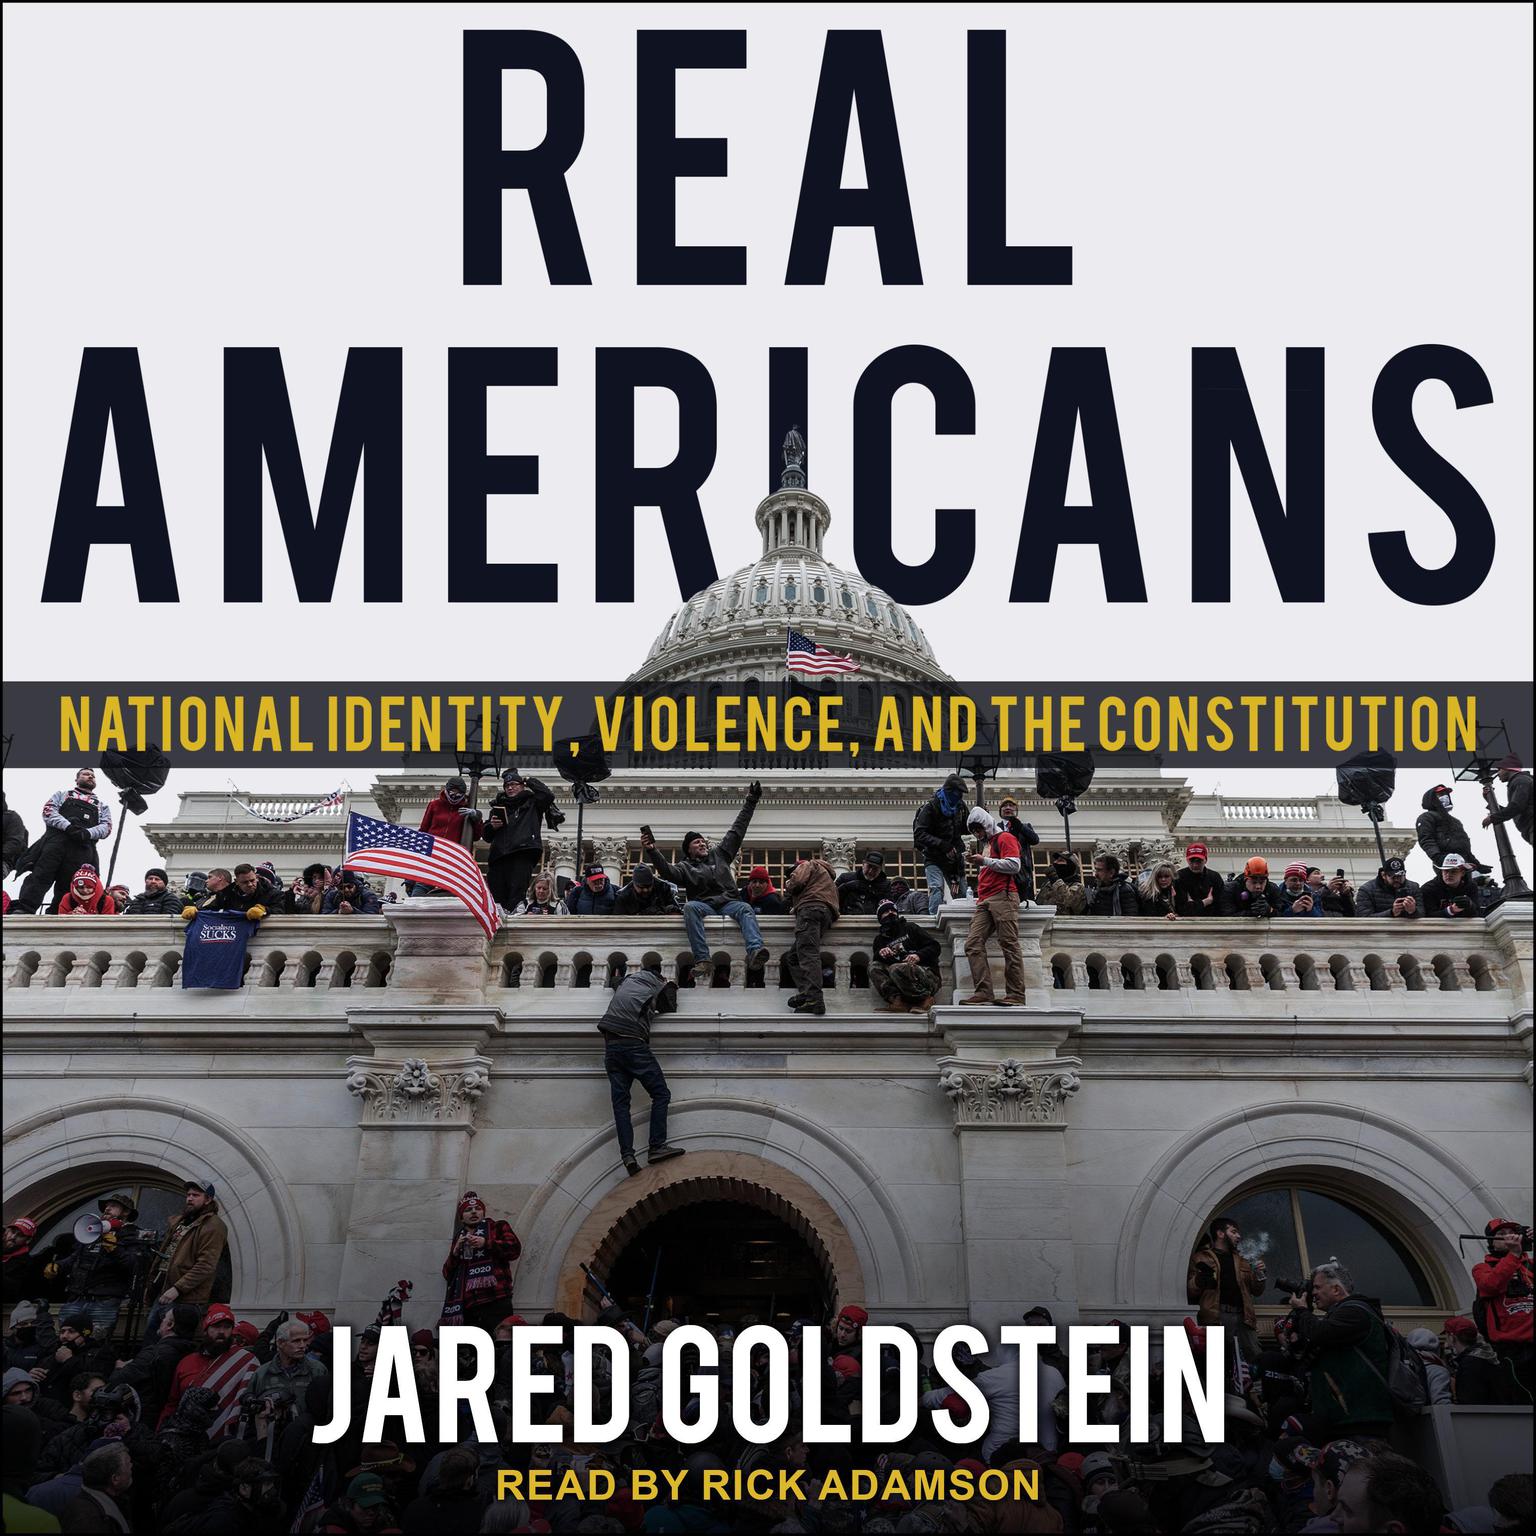 Real Americans: National Identity, Violence, and the Constitution Audiobook, by Jared Goldstein